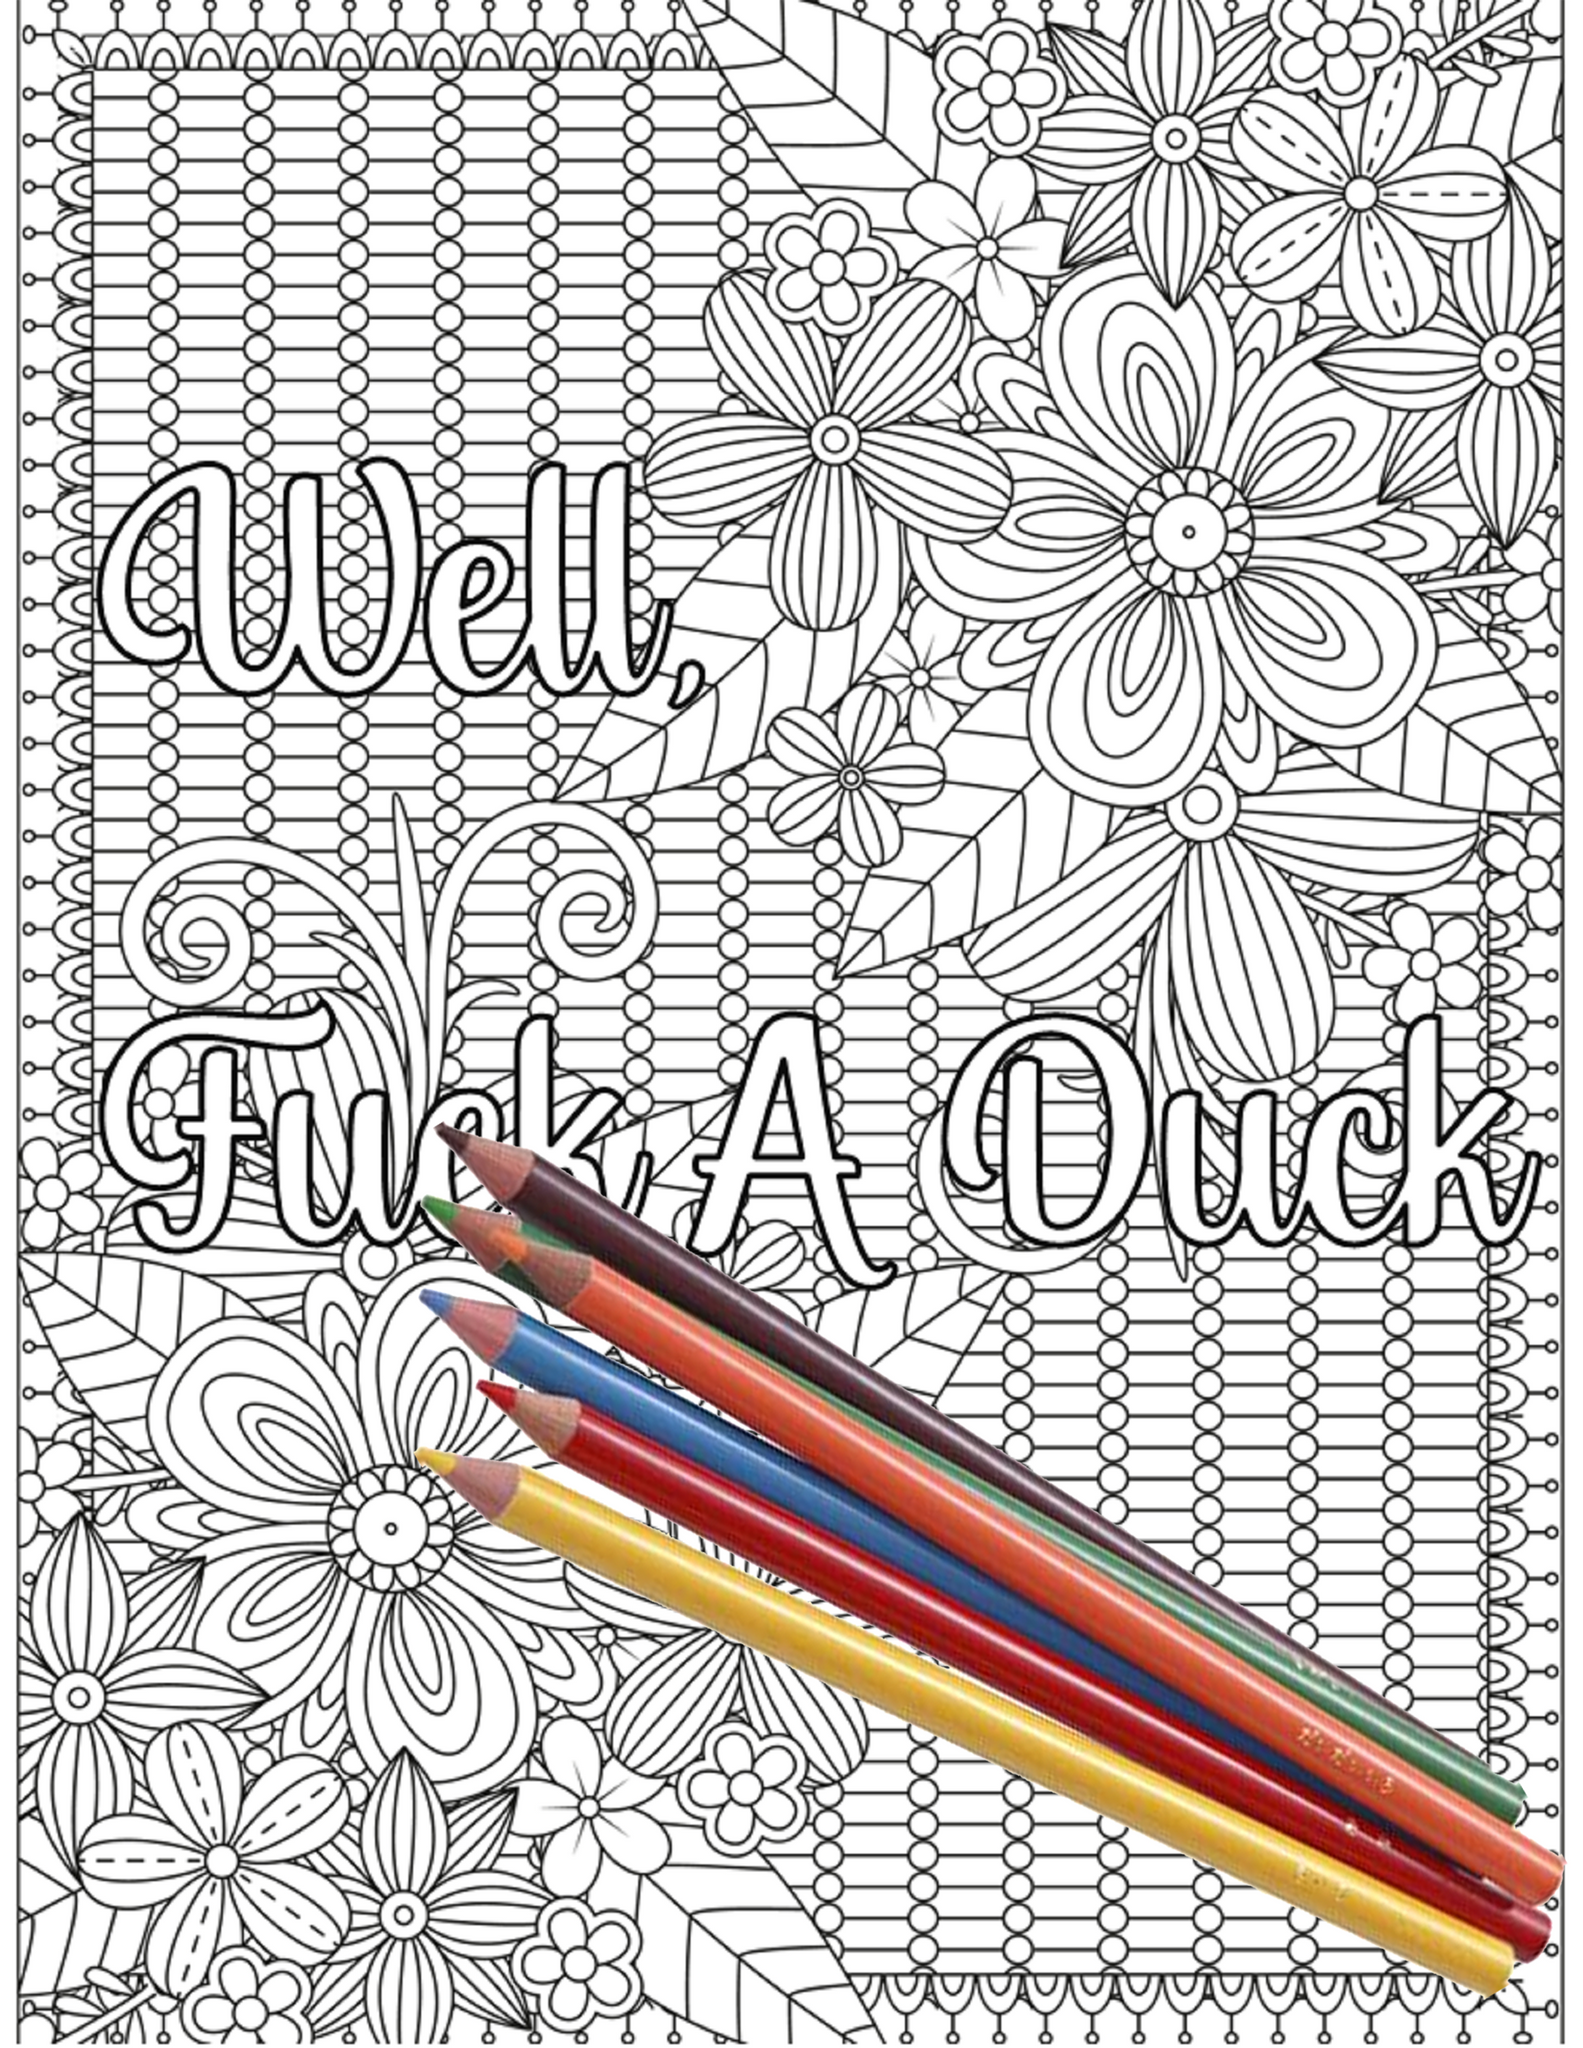 Cursing Coloring Book for Adults Only: Adult Swear Word Coloring Book and Pencils, Cursing Coloring Book for Adults, Cussing Coloring Books, Cursing Coloring Book, Adult Swear Word Coloring Book and Pencils, Curse Word Pens [Book]